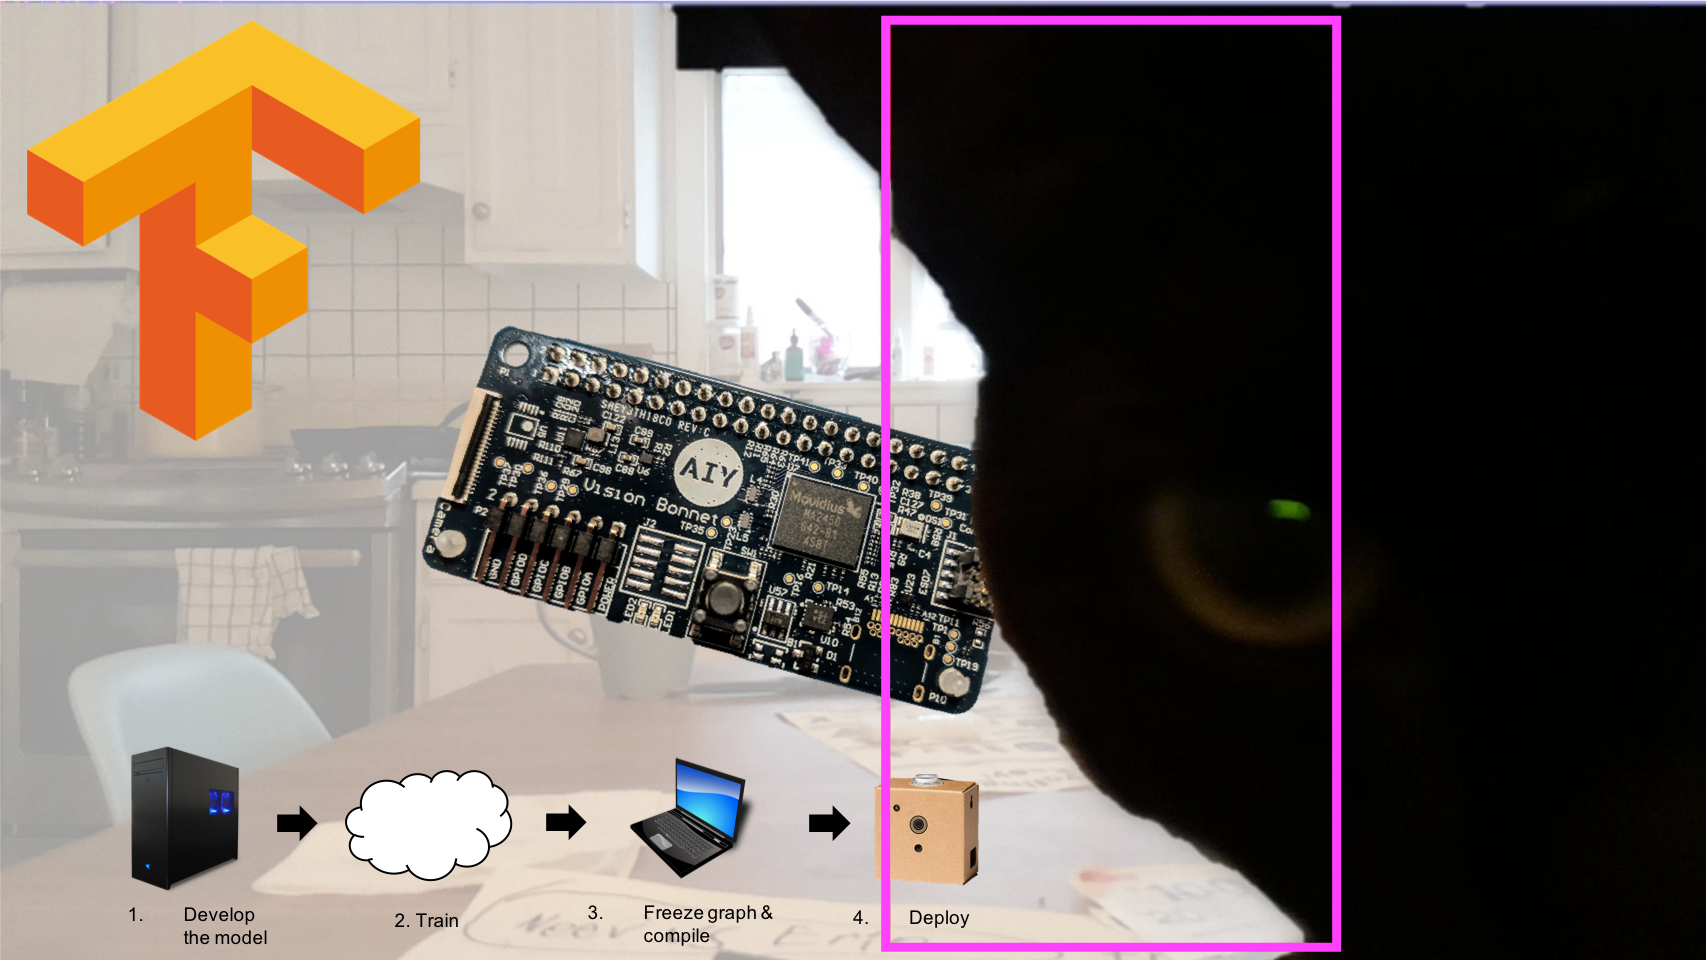 cogint.ai: Computer Vision Training, the AIY Vision Kit, and Cats